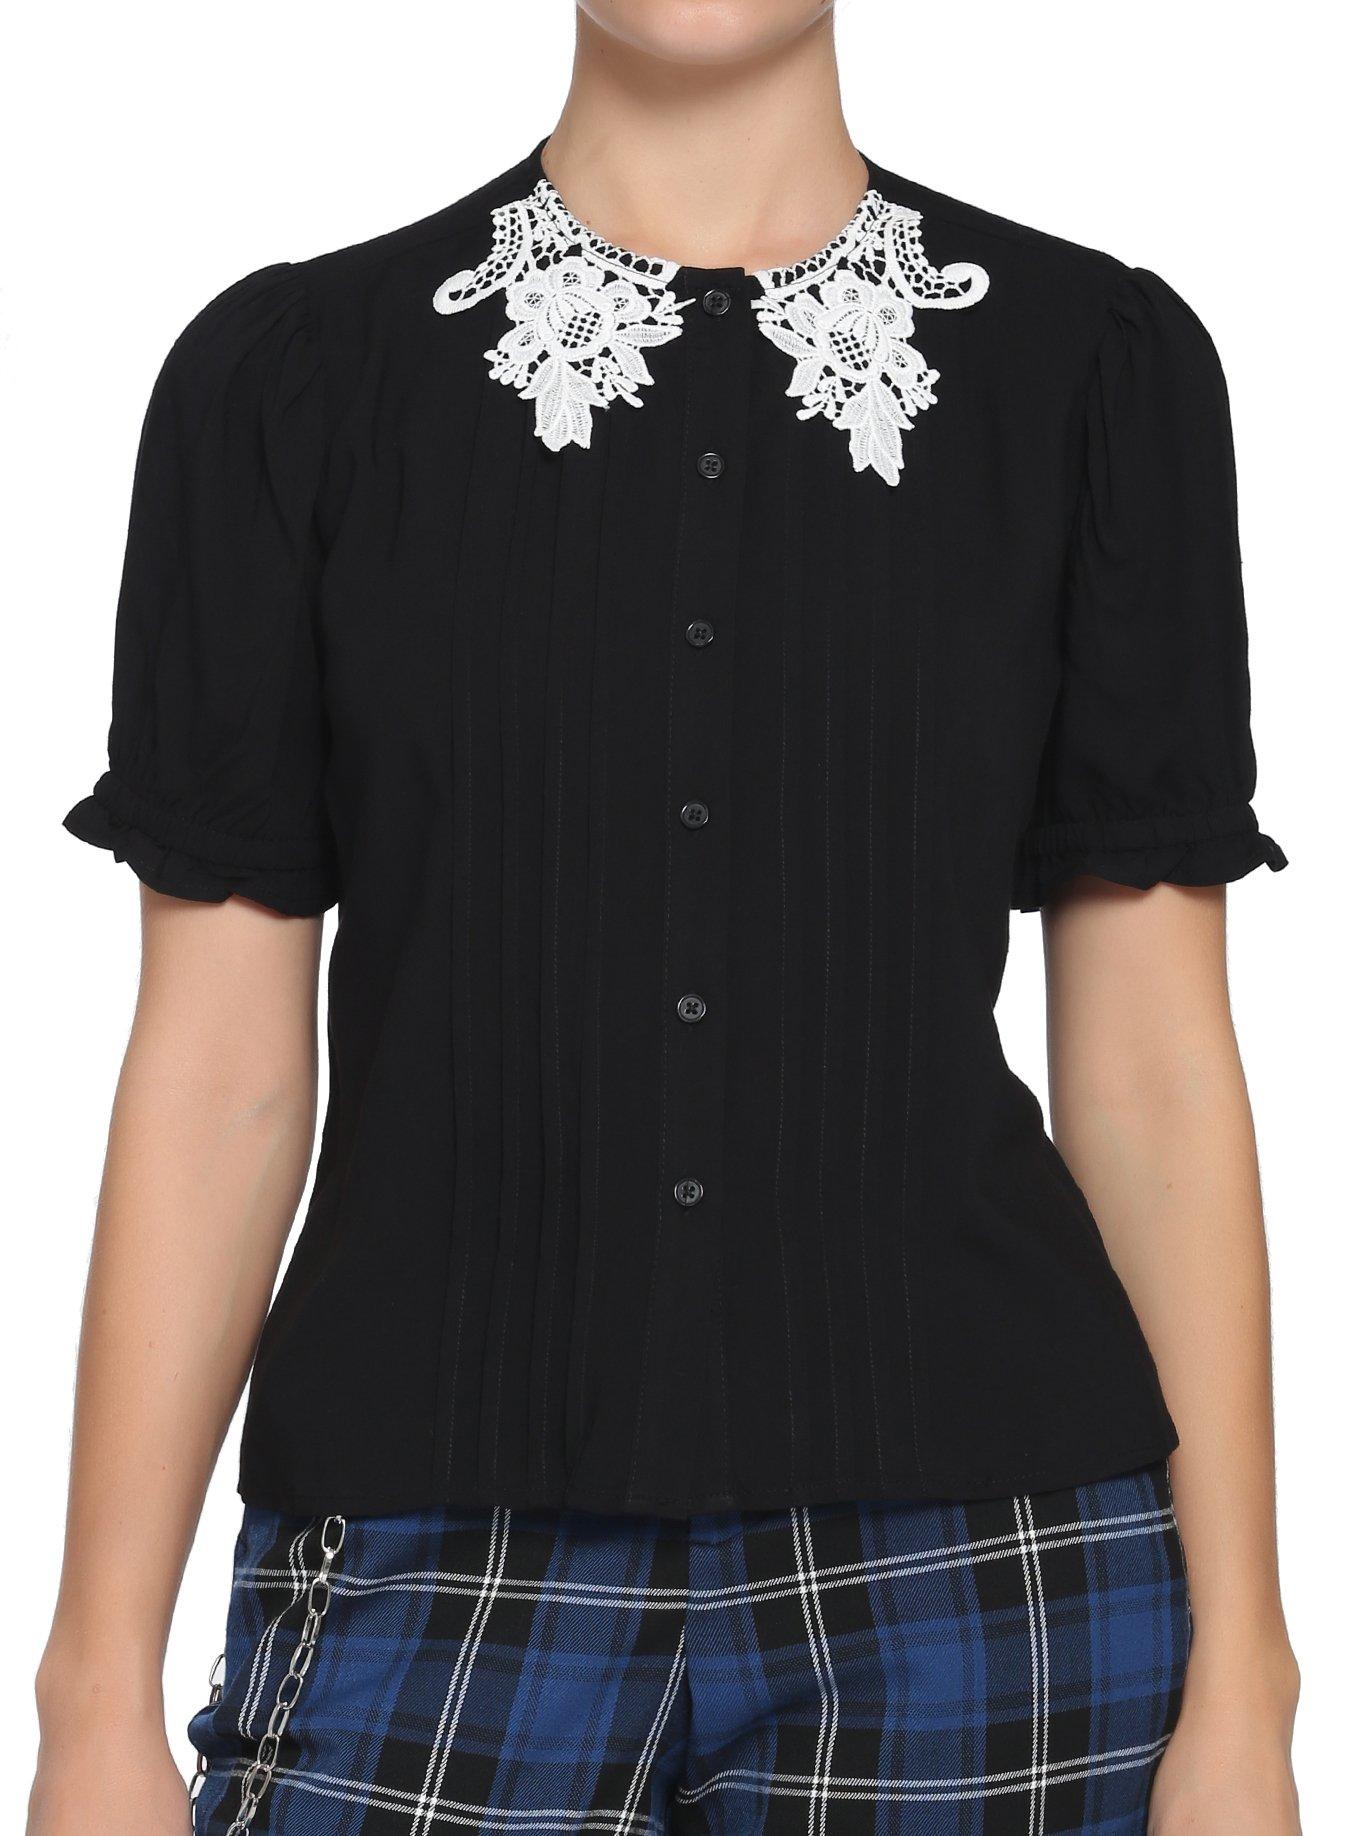 Black & White Lace Collar Girls Woven Button-Up, BLACK, hi-res